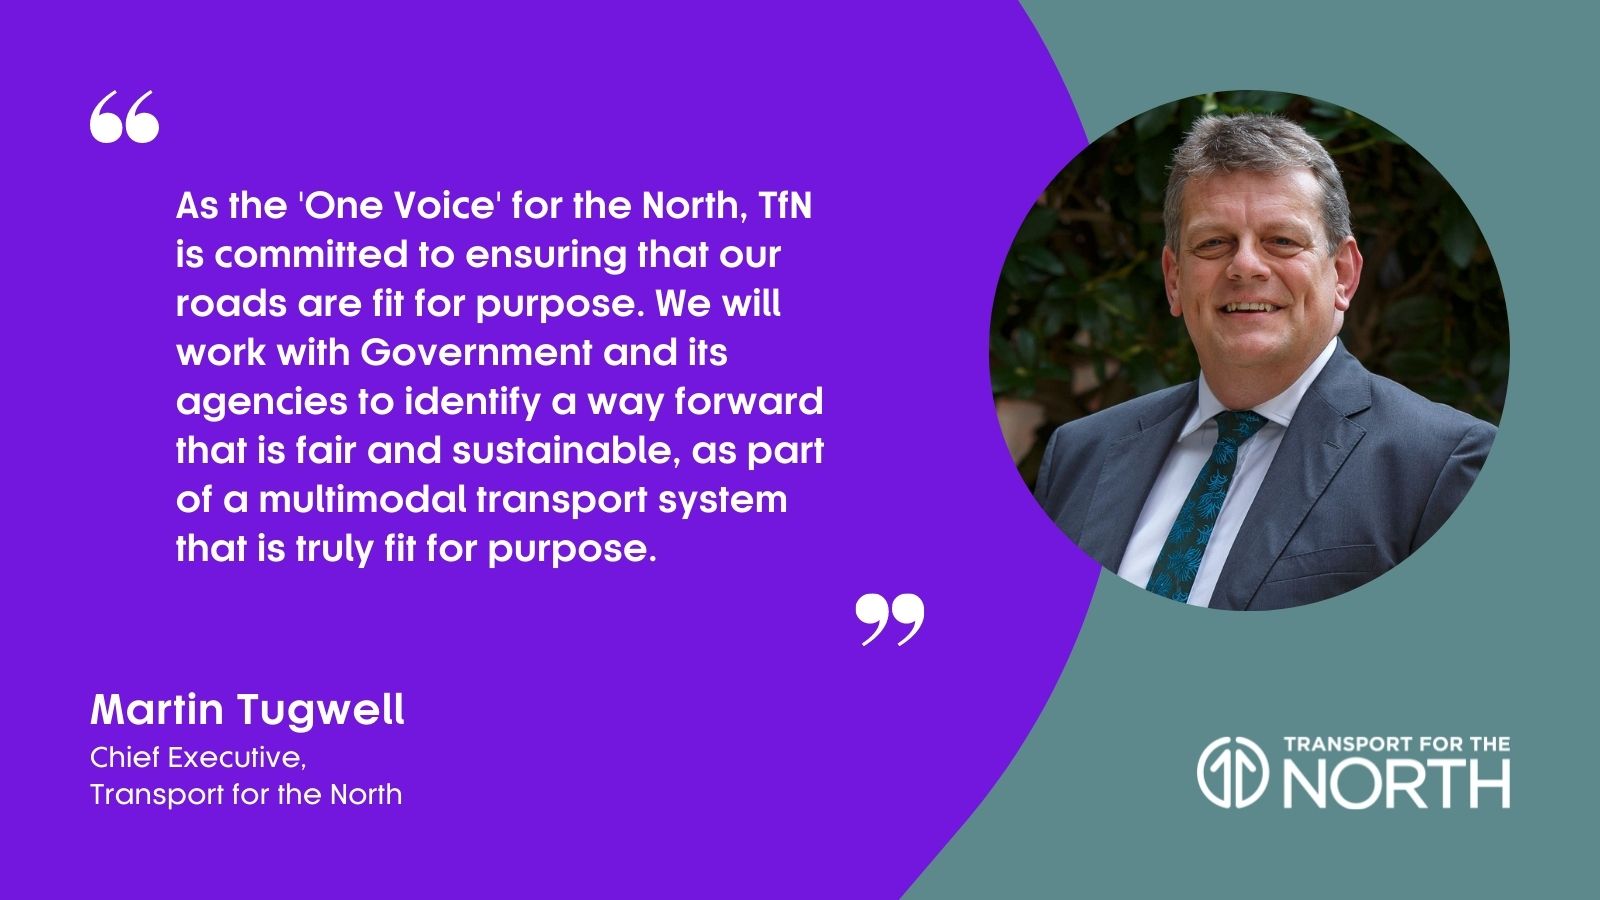 As the ‘One Voice’ for the North, TfN is committed to ensuring that our roads are fit for purpose.